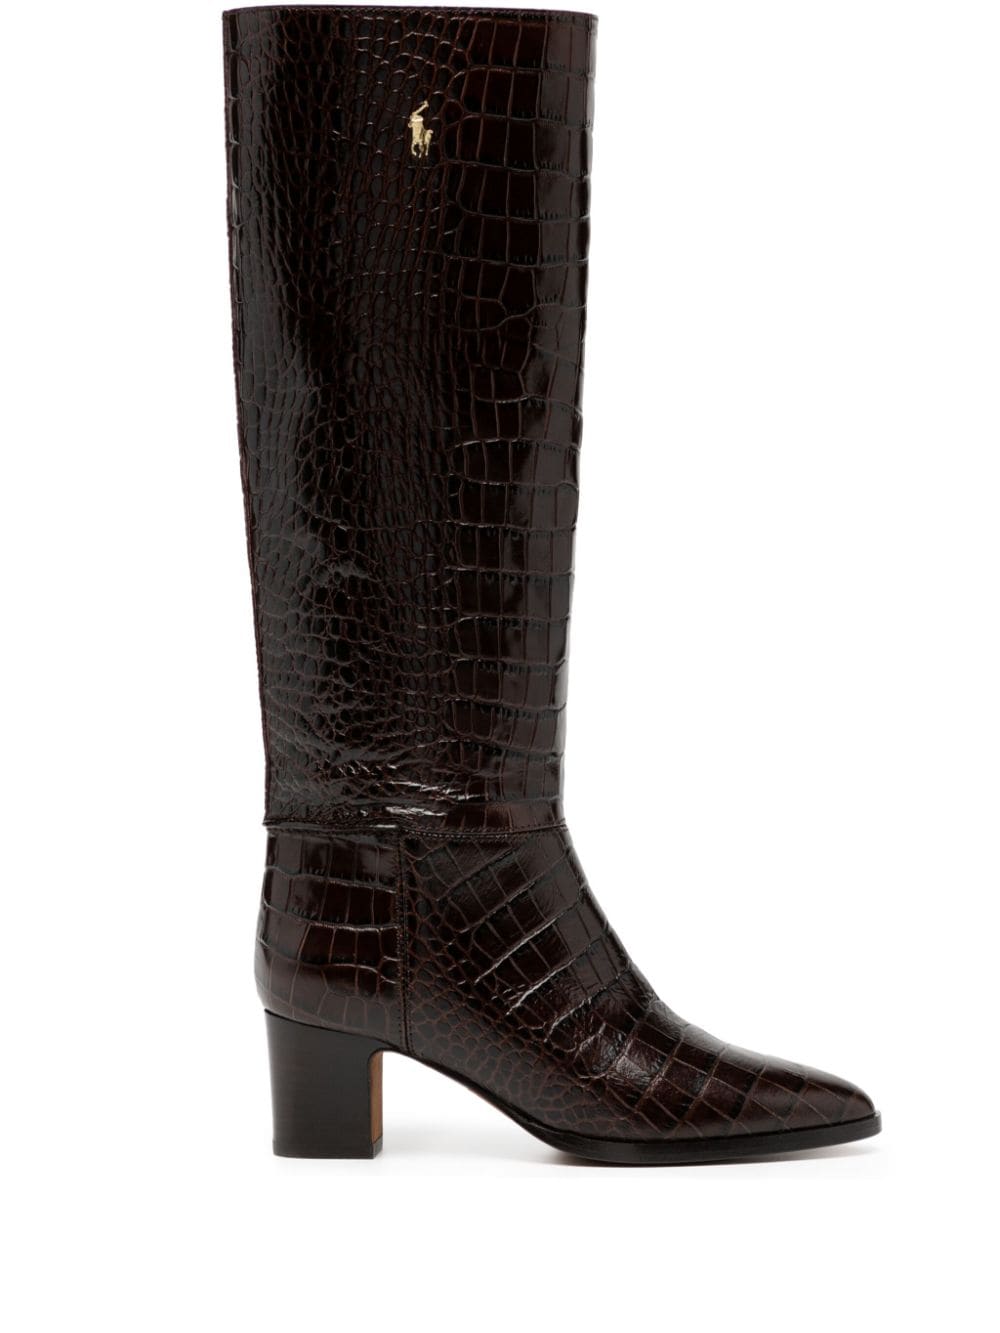 55mm crocodile-embossed leather boots